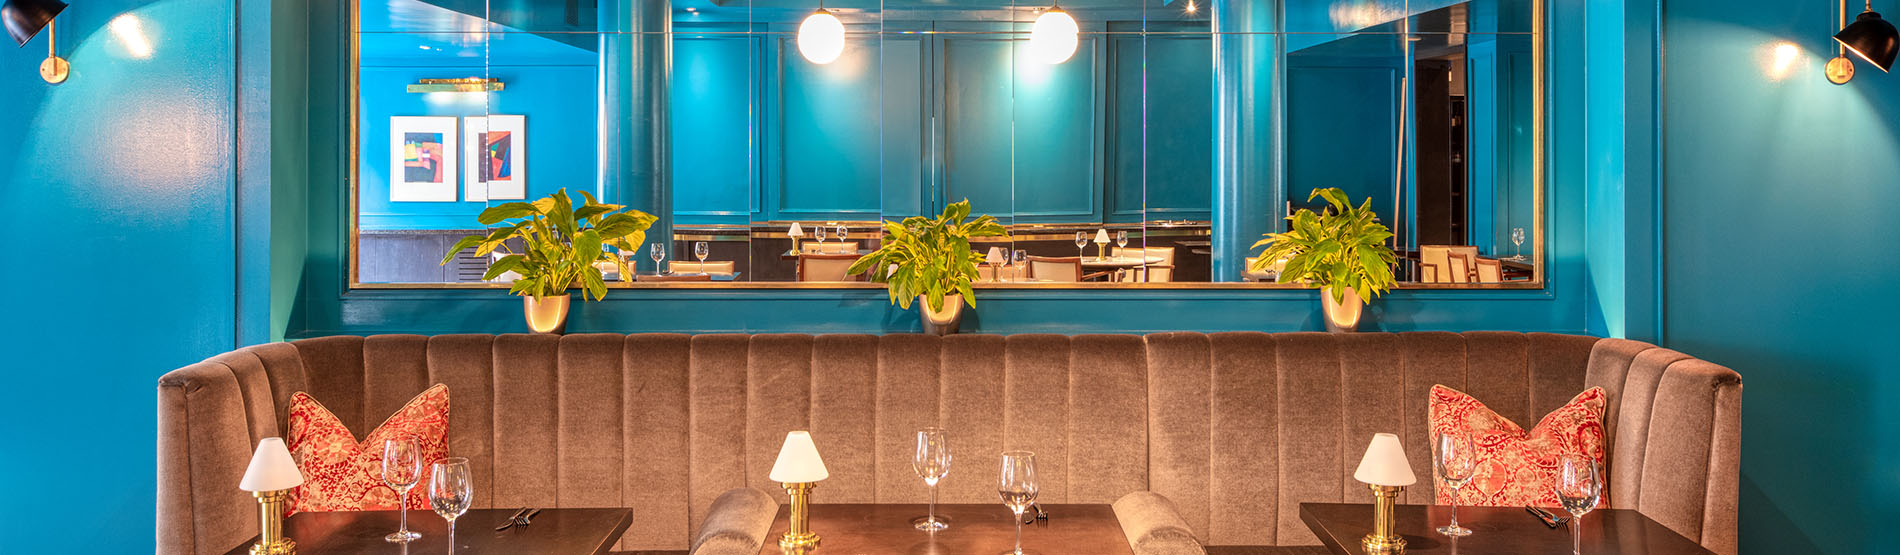 Restaurant with vibrant blue walls